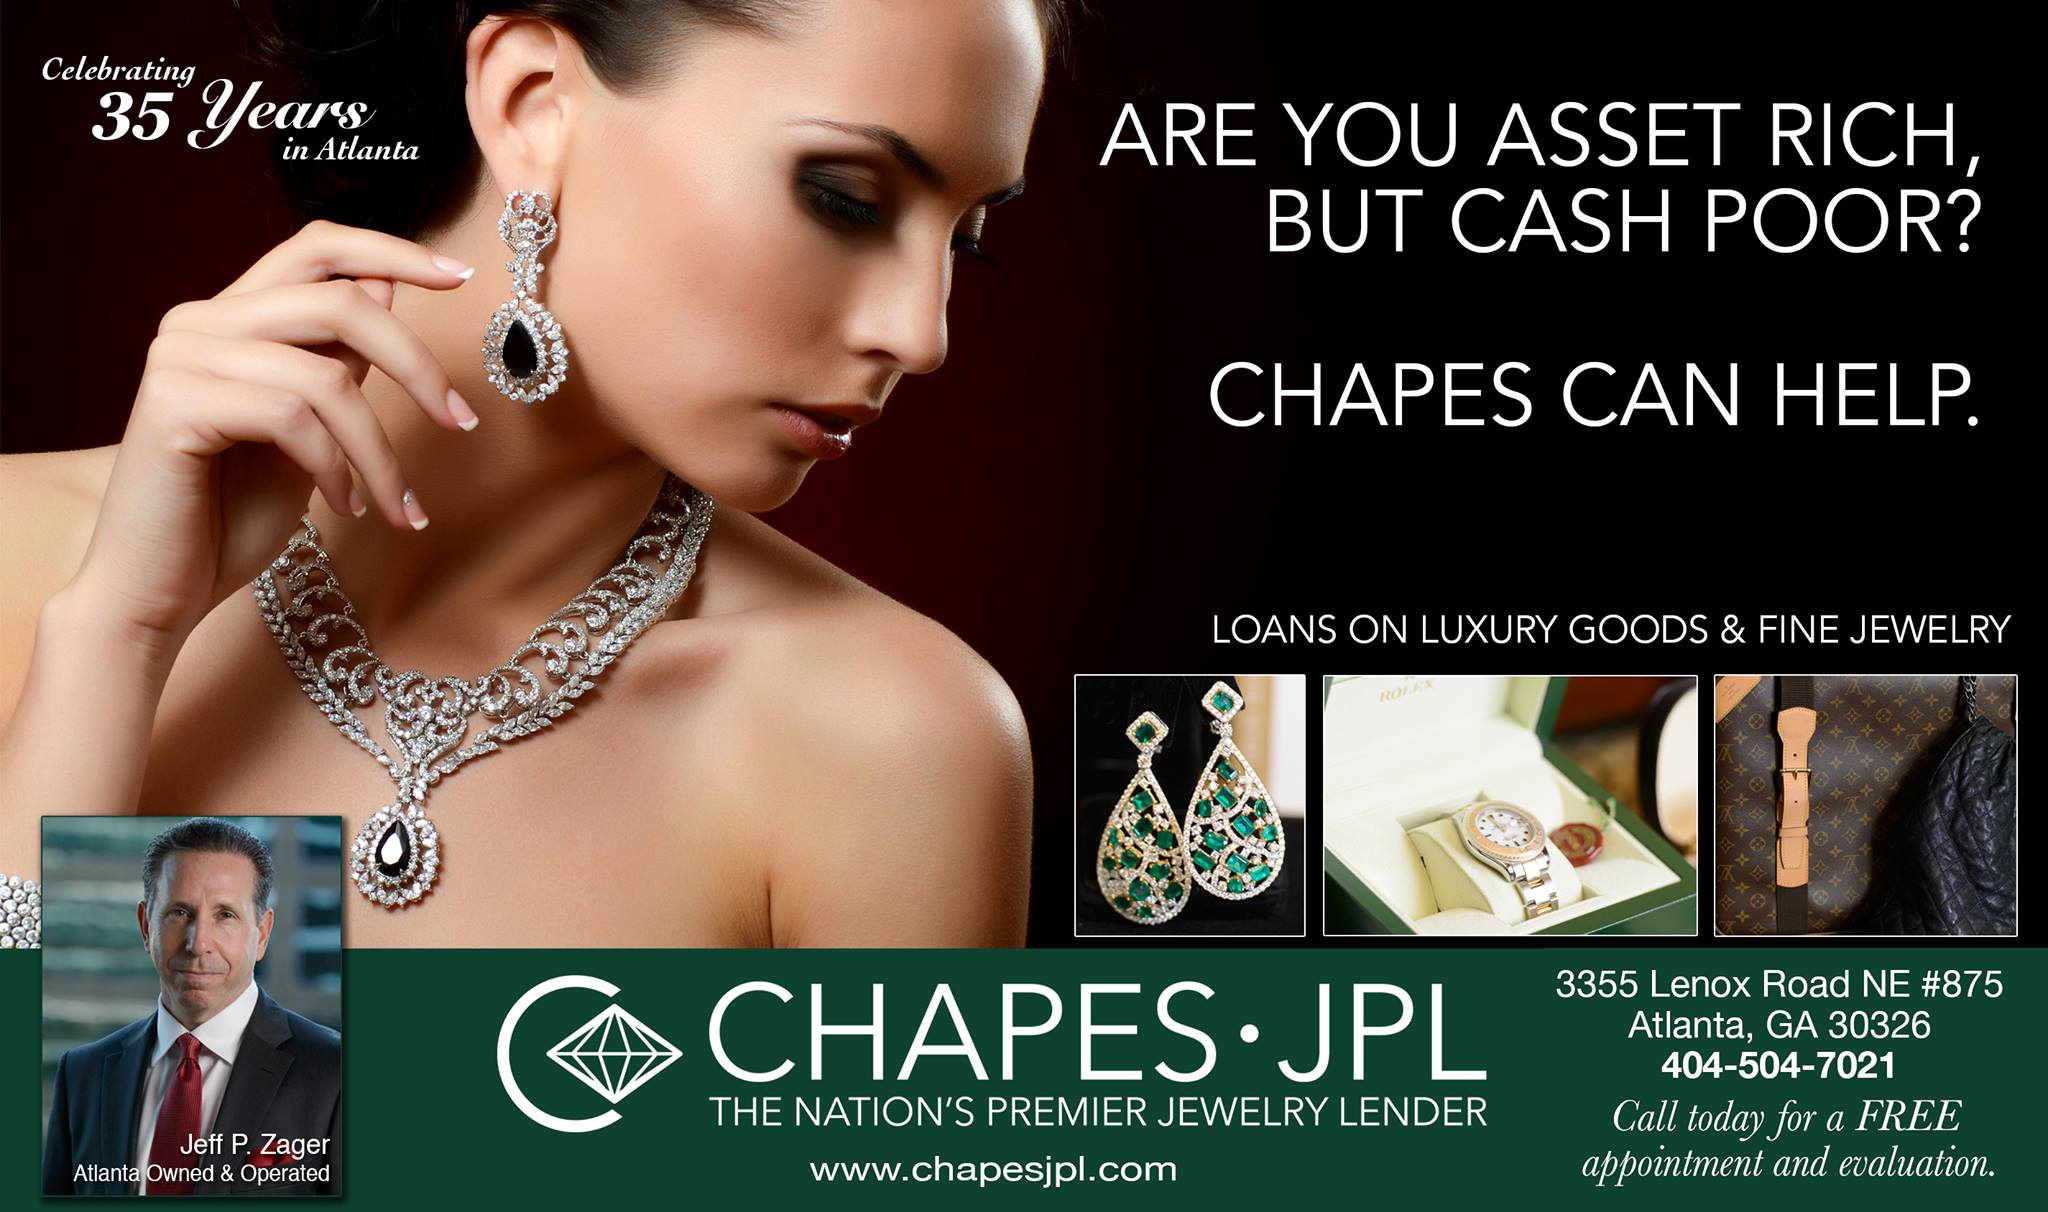 Chapes-JPL: The Trusted Name for Accounts Receivable Financing in Atlanta